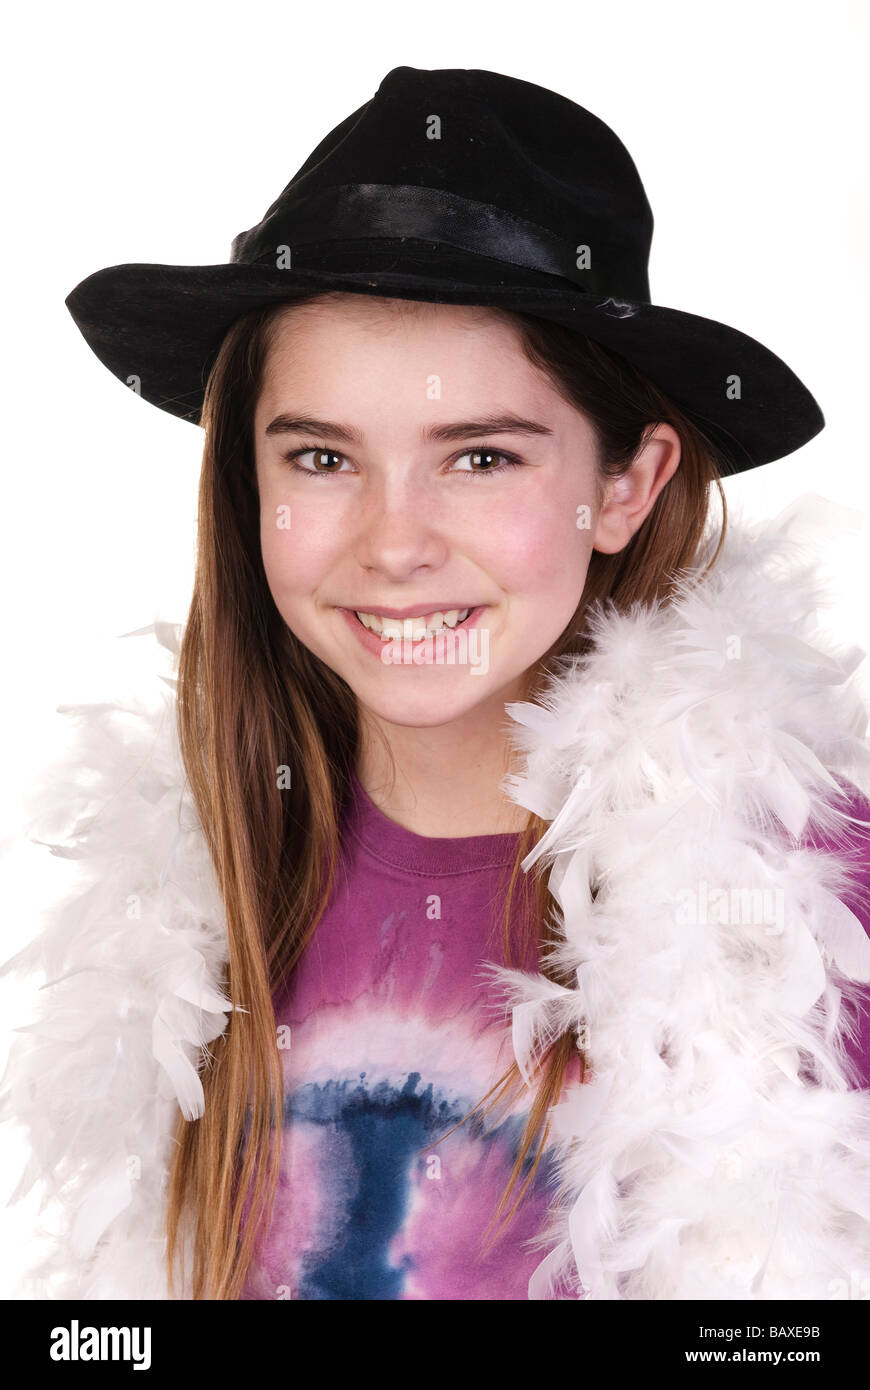 A young teenager dresses in a funky outfit to express her individuality Stock Photo